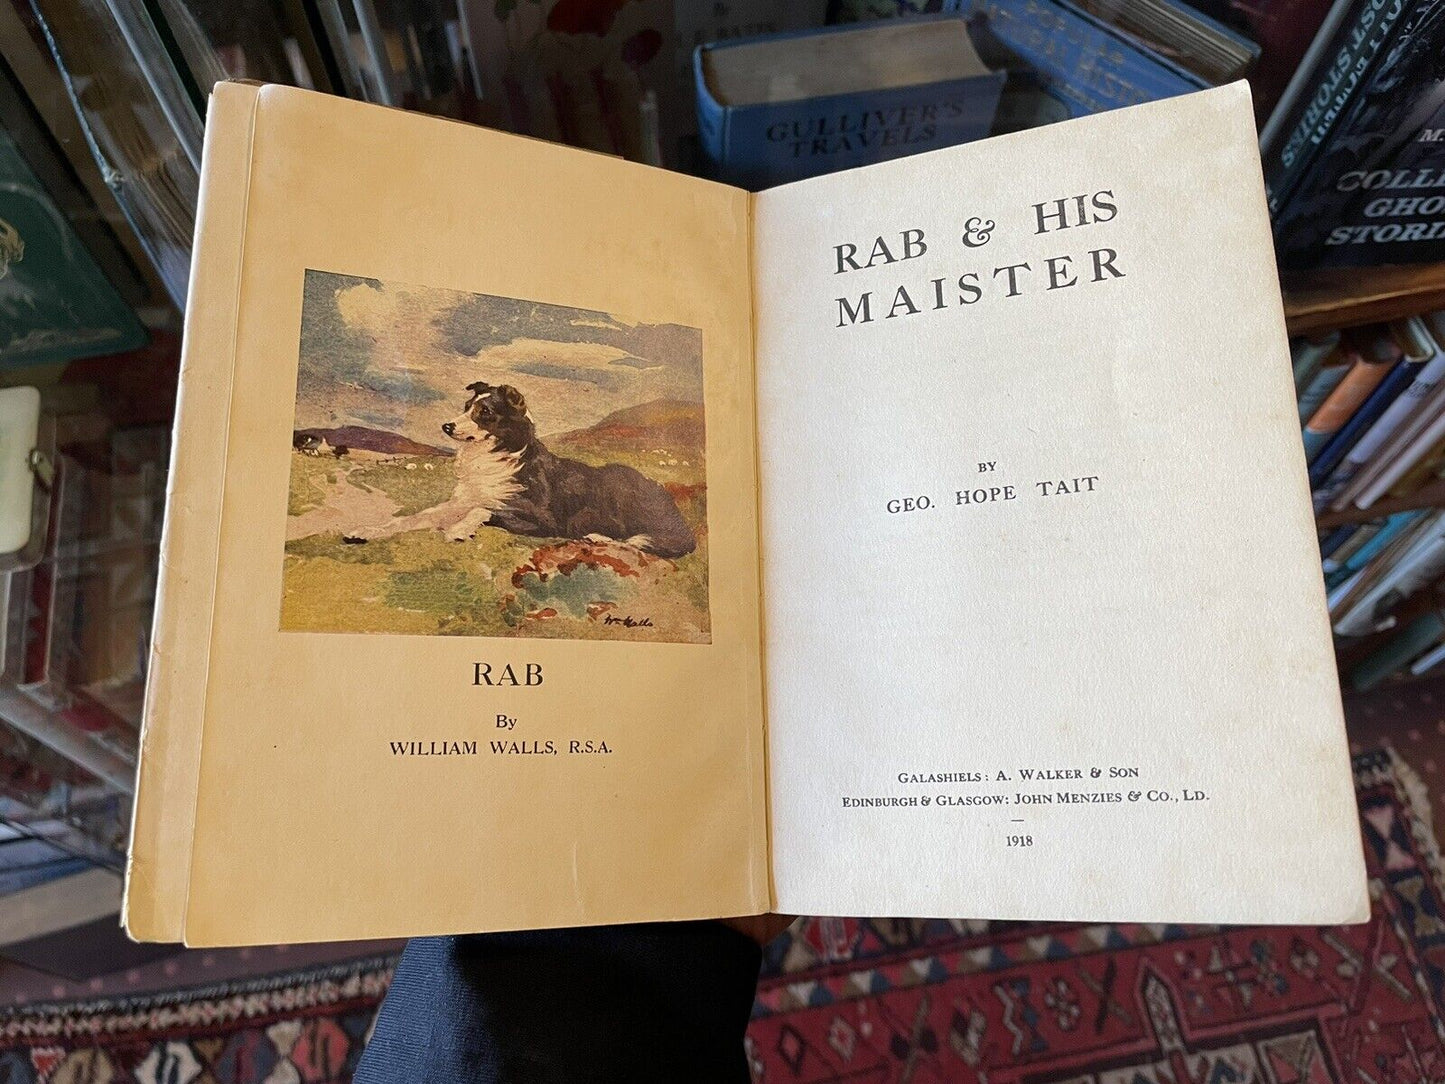 Rab (A Yarrow Dog) and His Maister : Tait :  Lowland Scots Poetry : Collie 1918